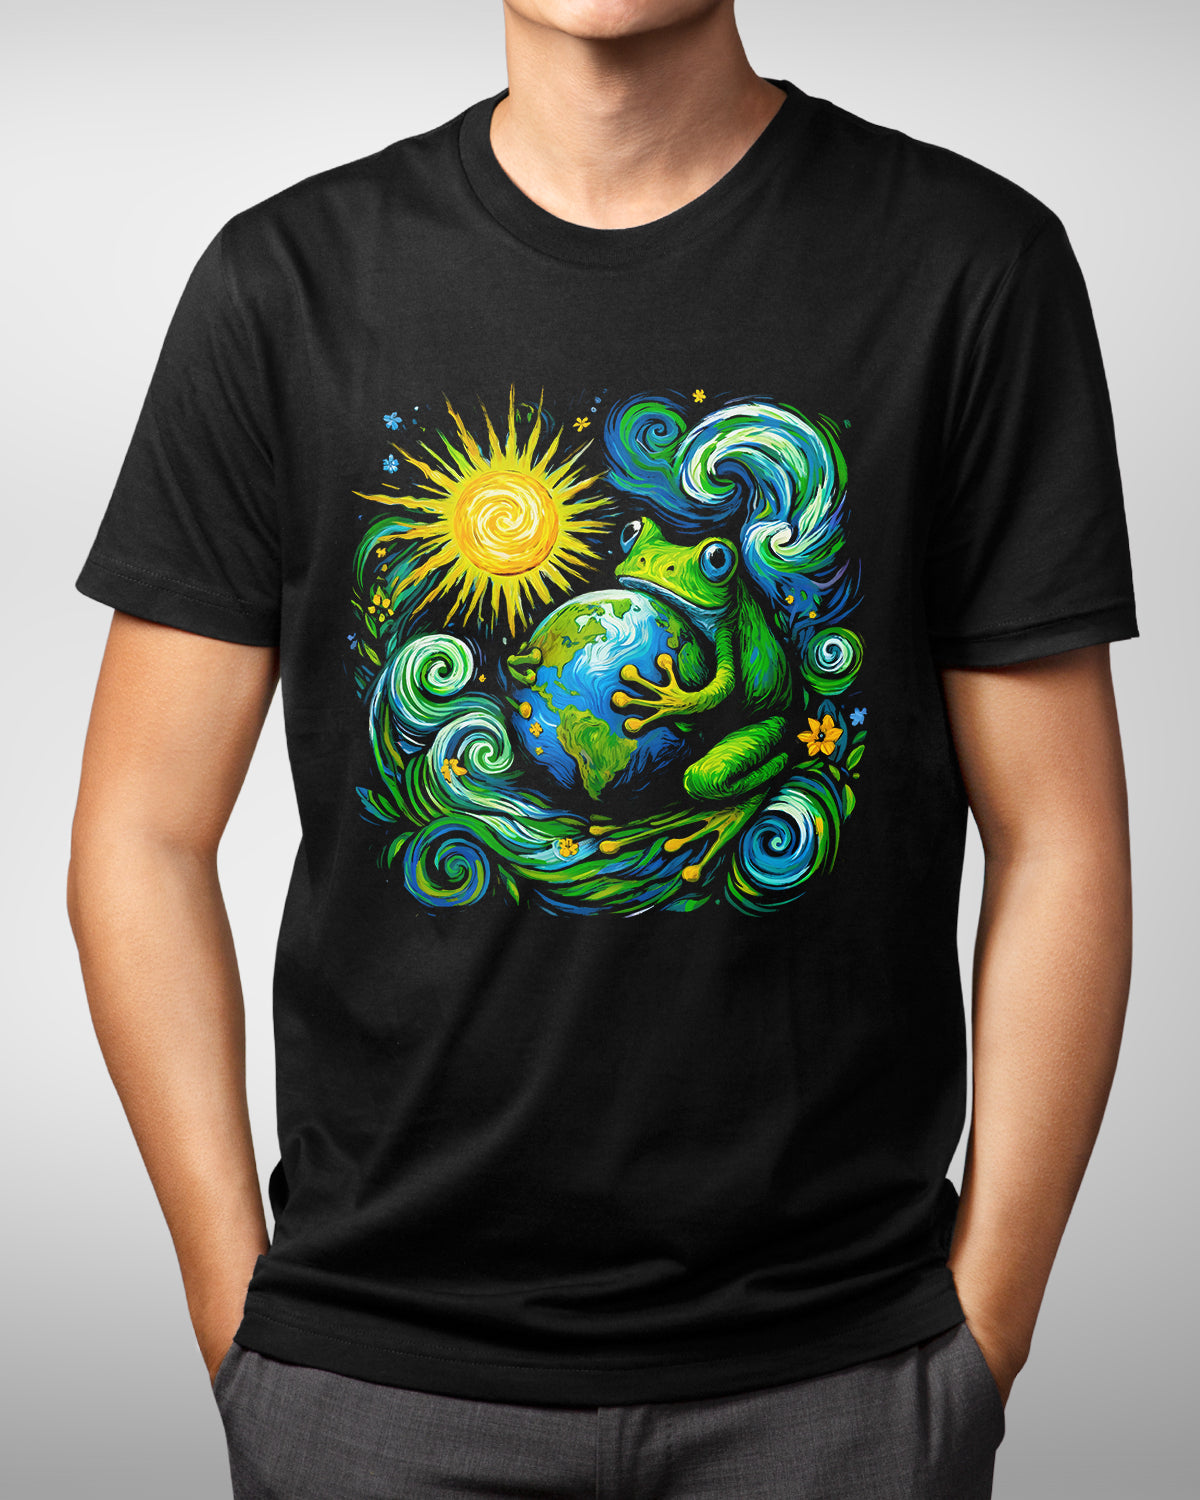 Frog Earth Day Shirt, Toad Nature Lover, Mother Earth Everyday, Green Cottagecore Themed Tee